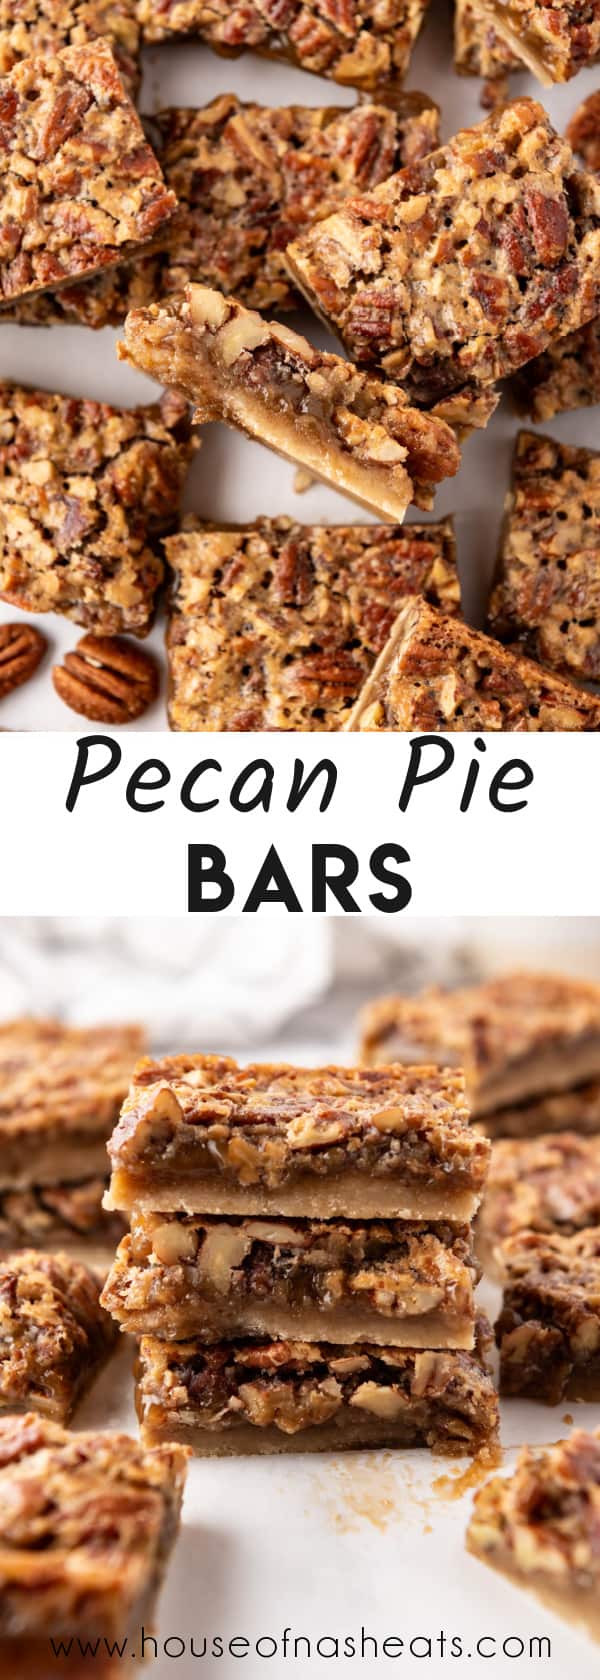 A collage of images of pecan pie bars with text overlay.